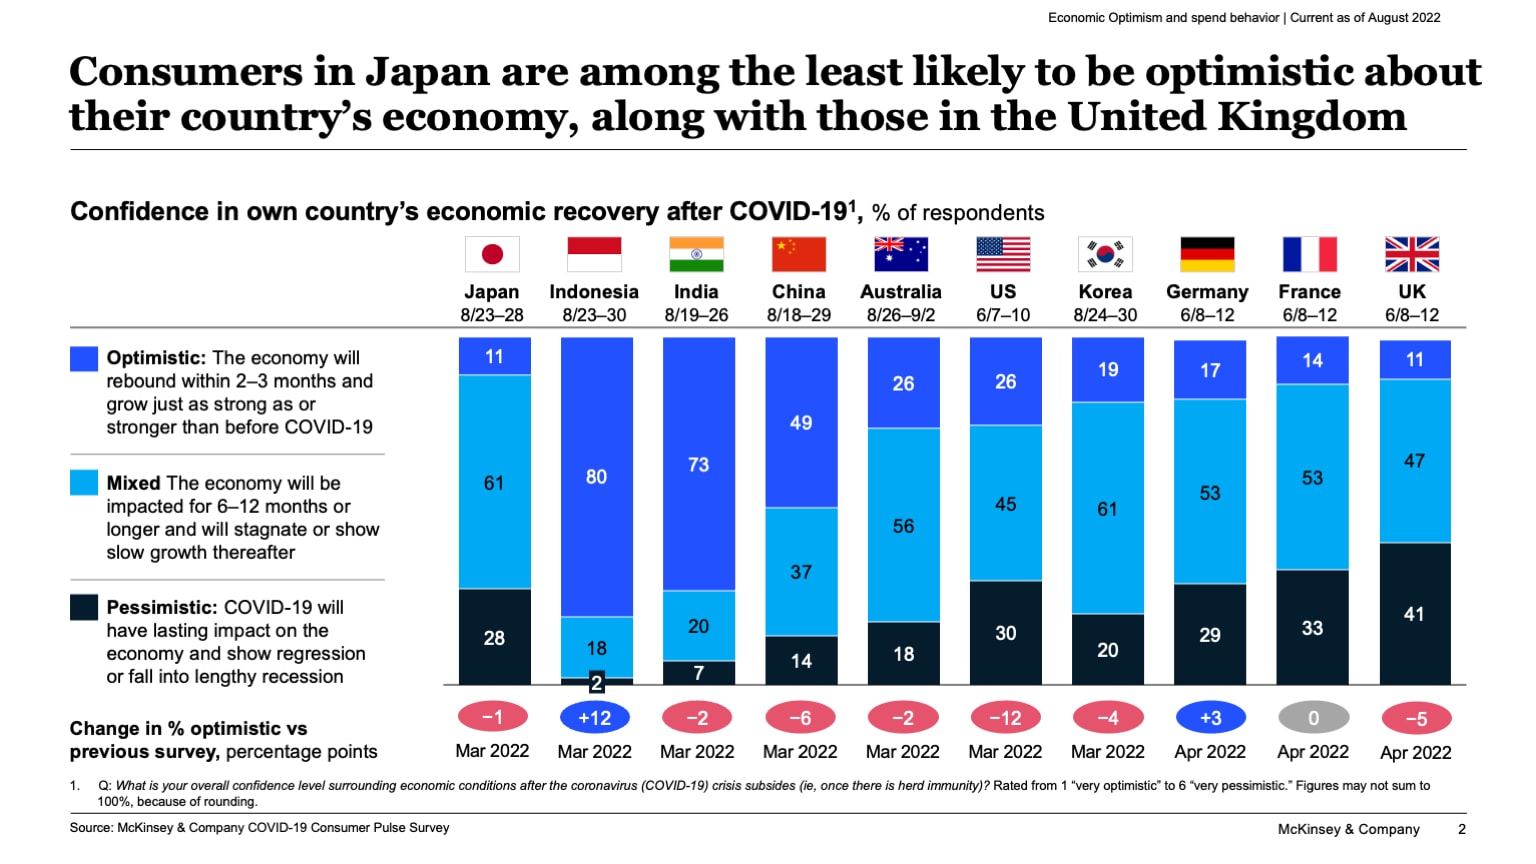 Consumers in Japan are among the least likely to be optimistic about their country’s economy, along with those in the United Kingdom